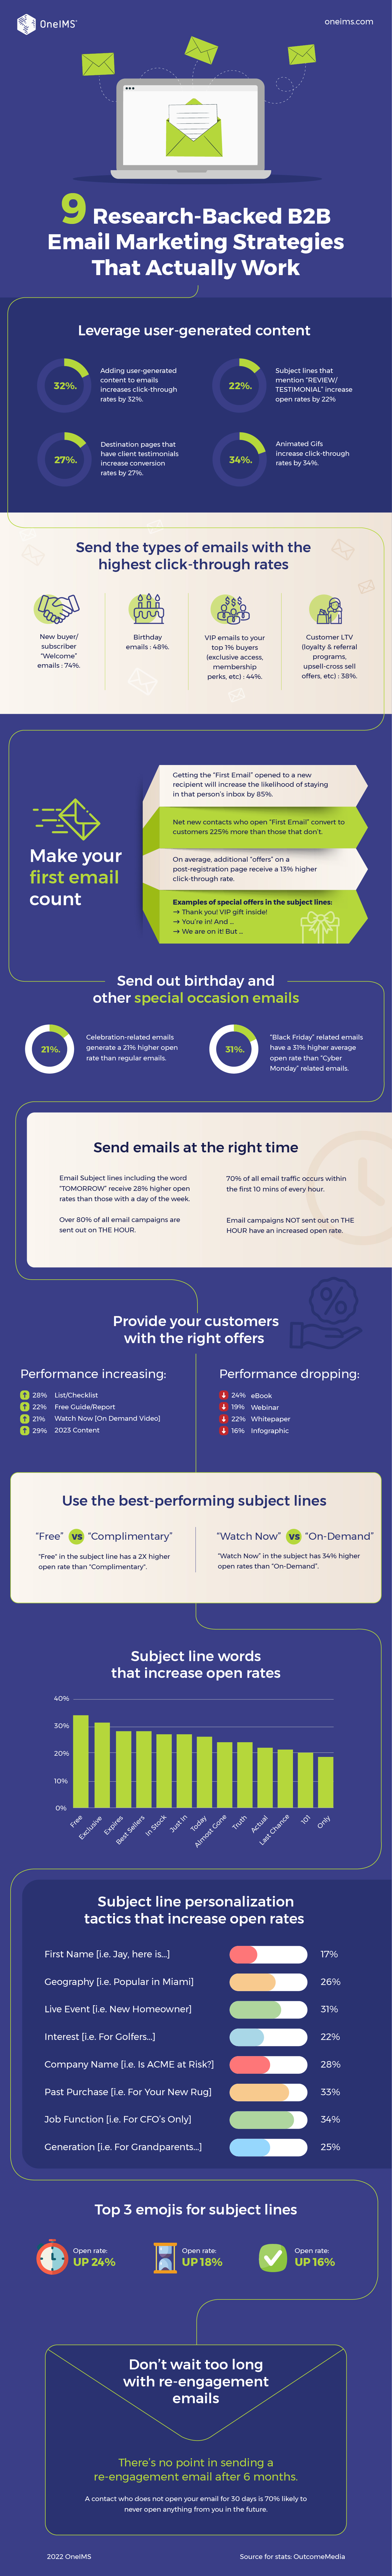 9 Research-Backed Email Marketing Strategies That Actually Work